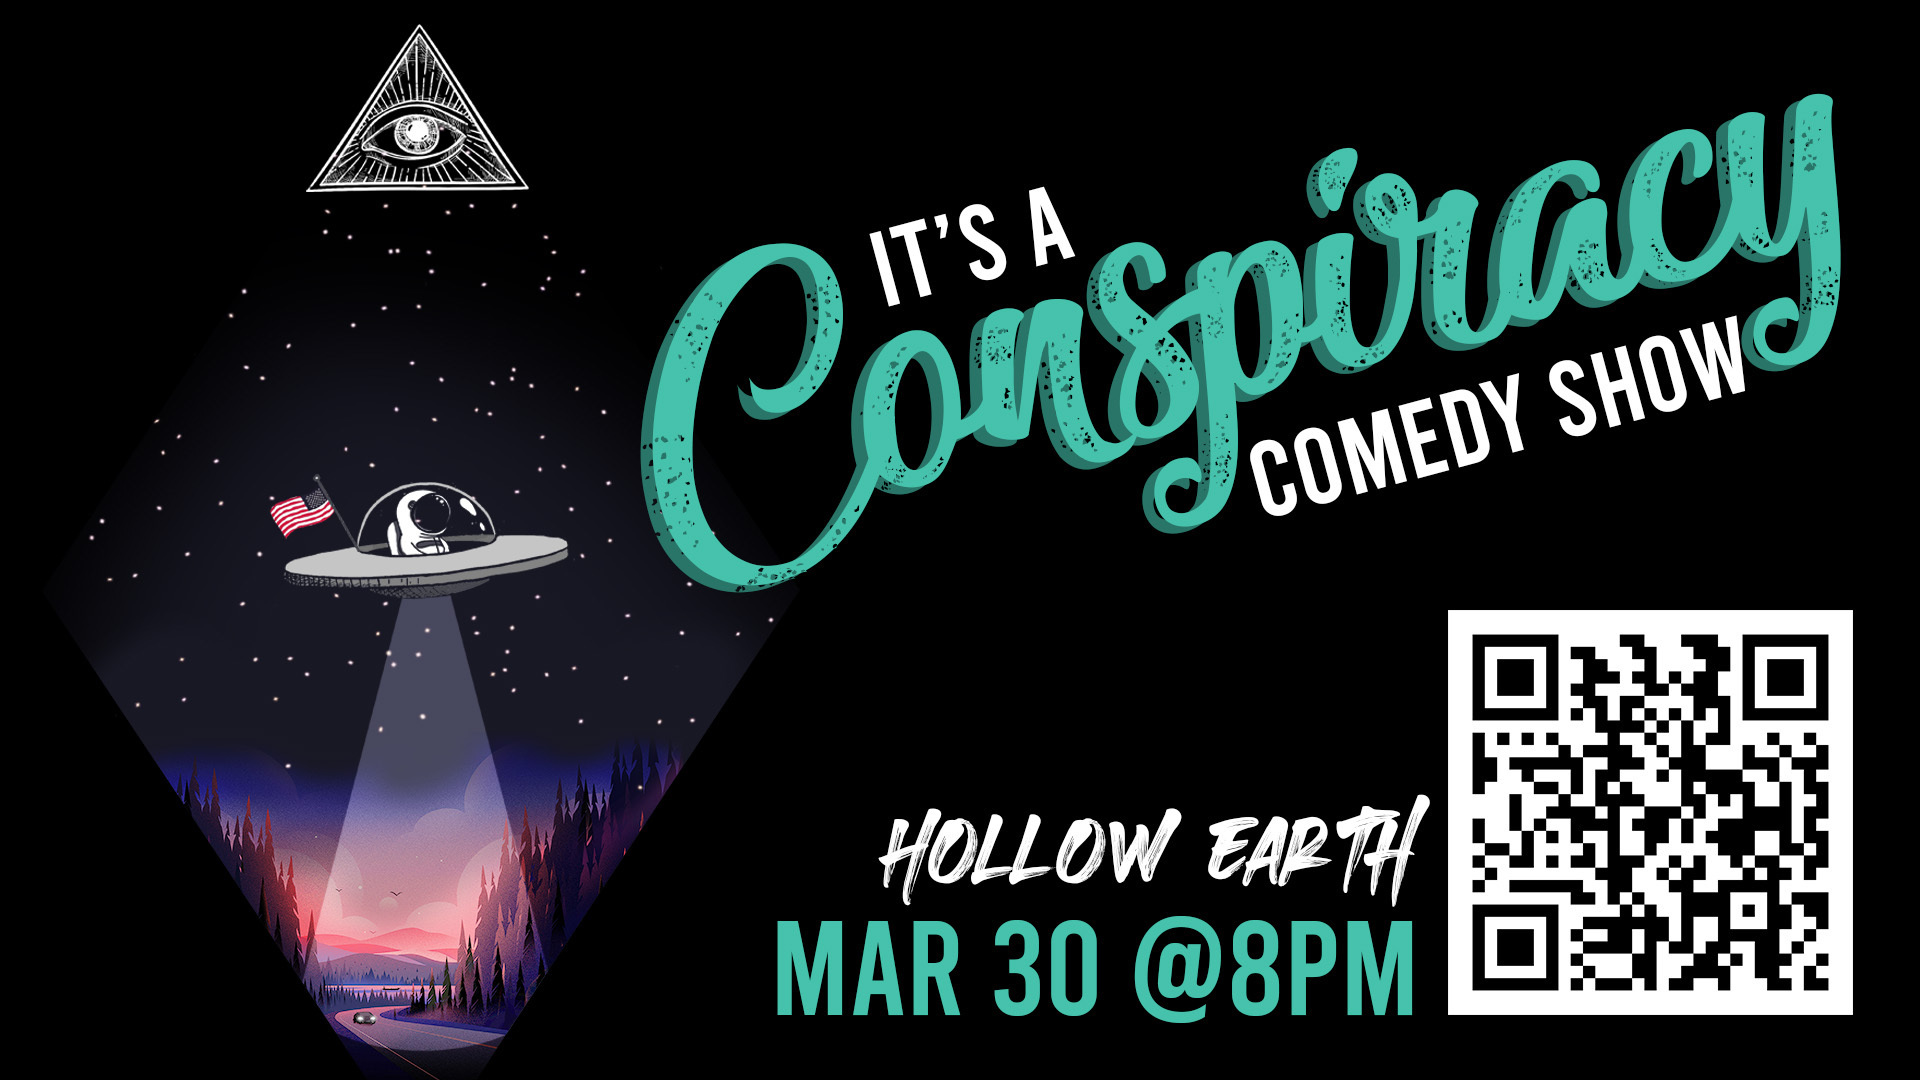 "It's A Conspiracy!" Comedy Show - Hollow Earth, Garden City, Idaho, United States